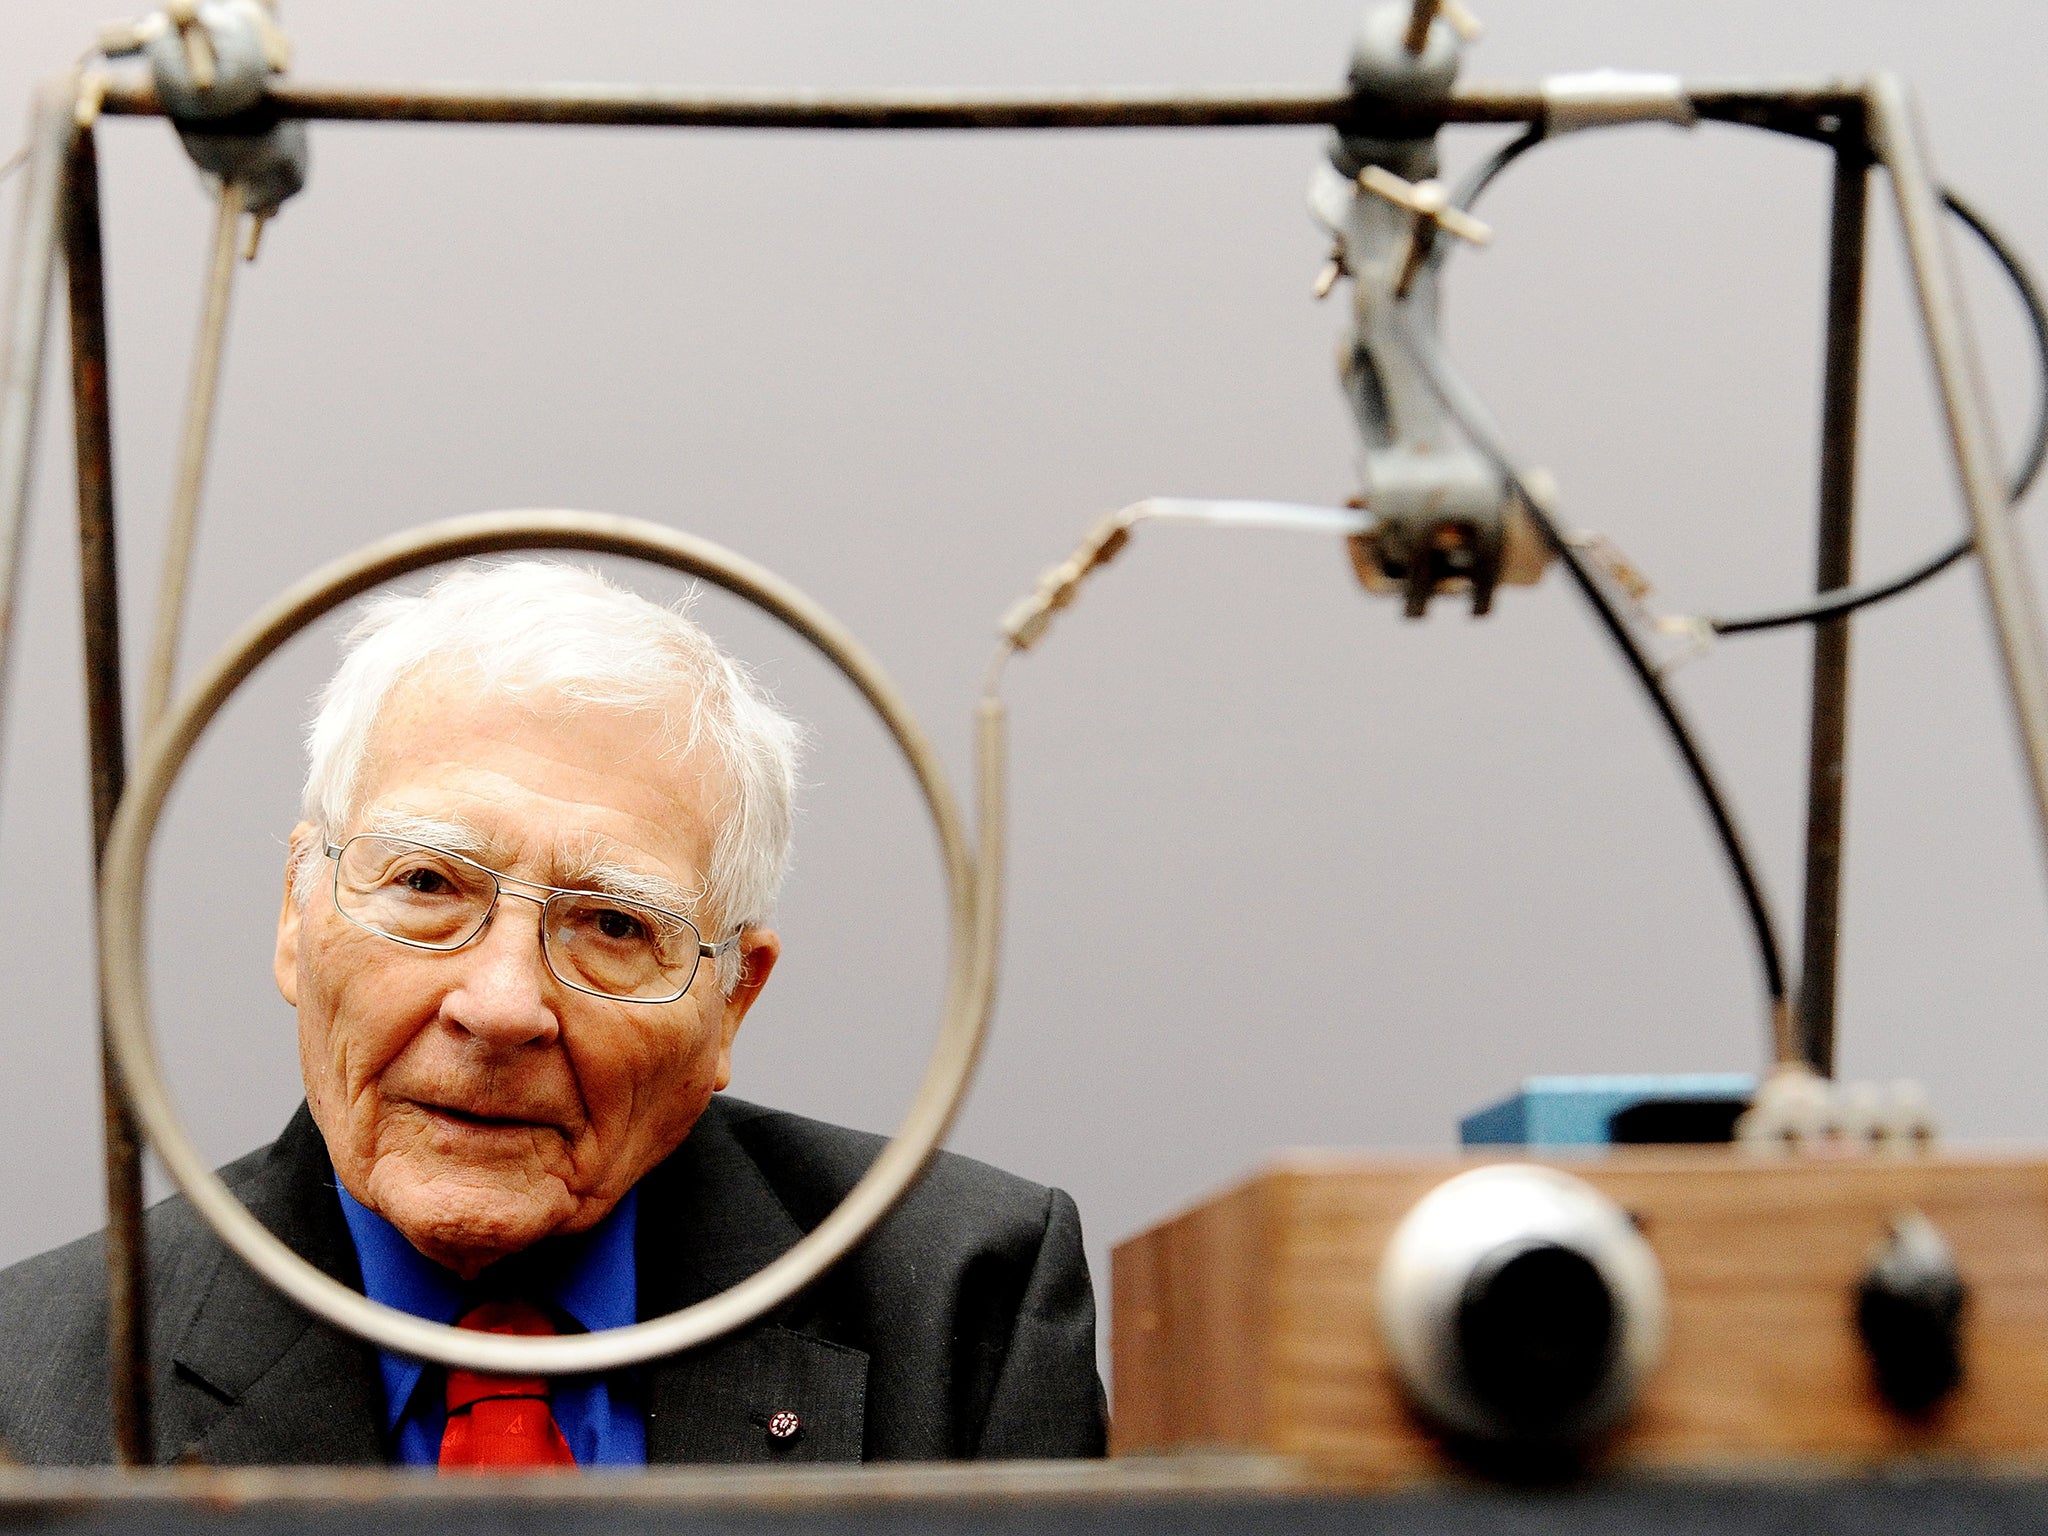 Lovelock with one of his early inventions, a homemade gas chromatography device, used for measuring gas and molecules present in the atmosphere